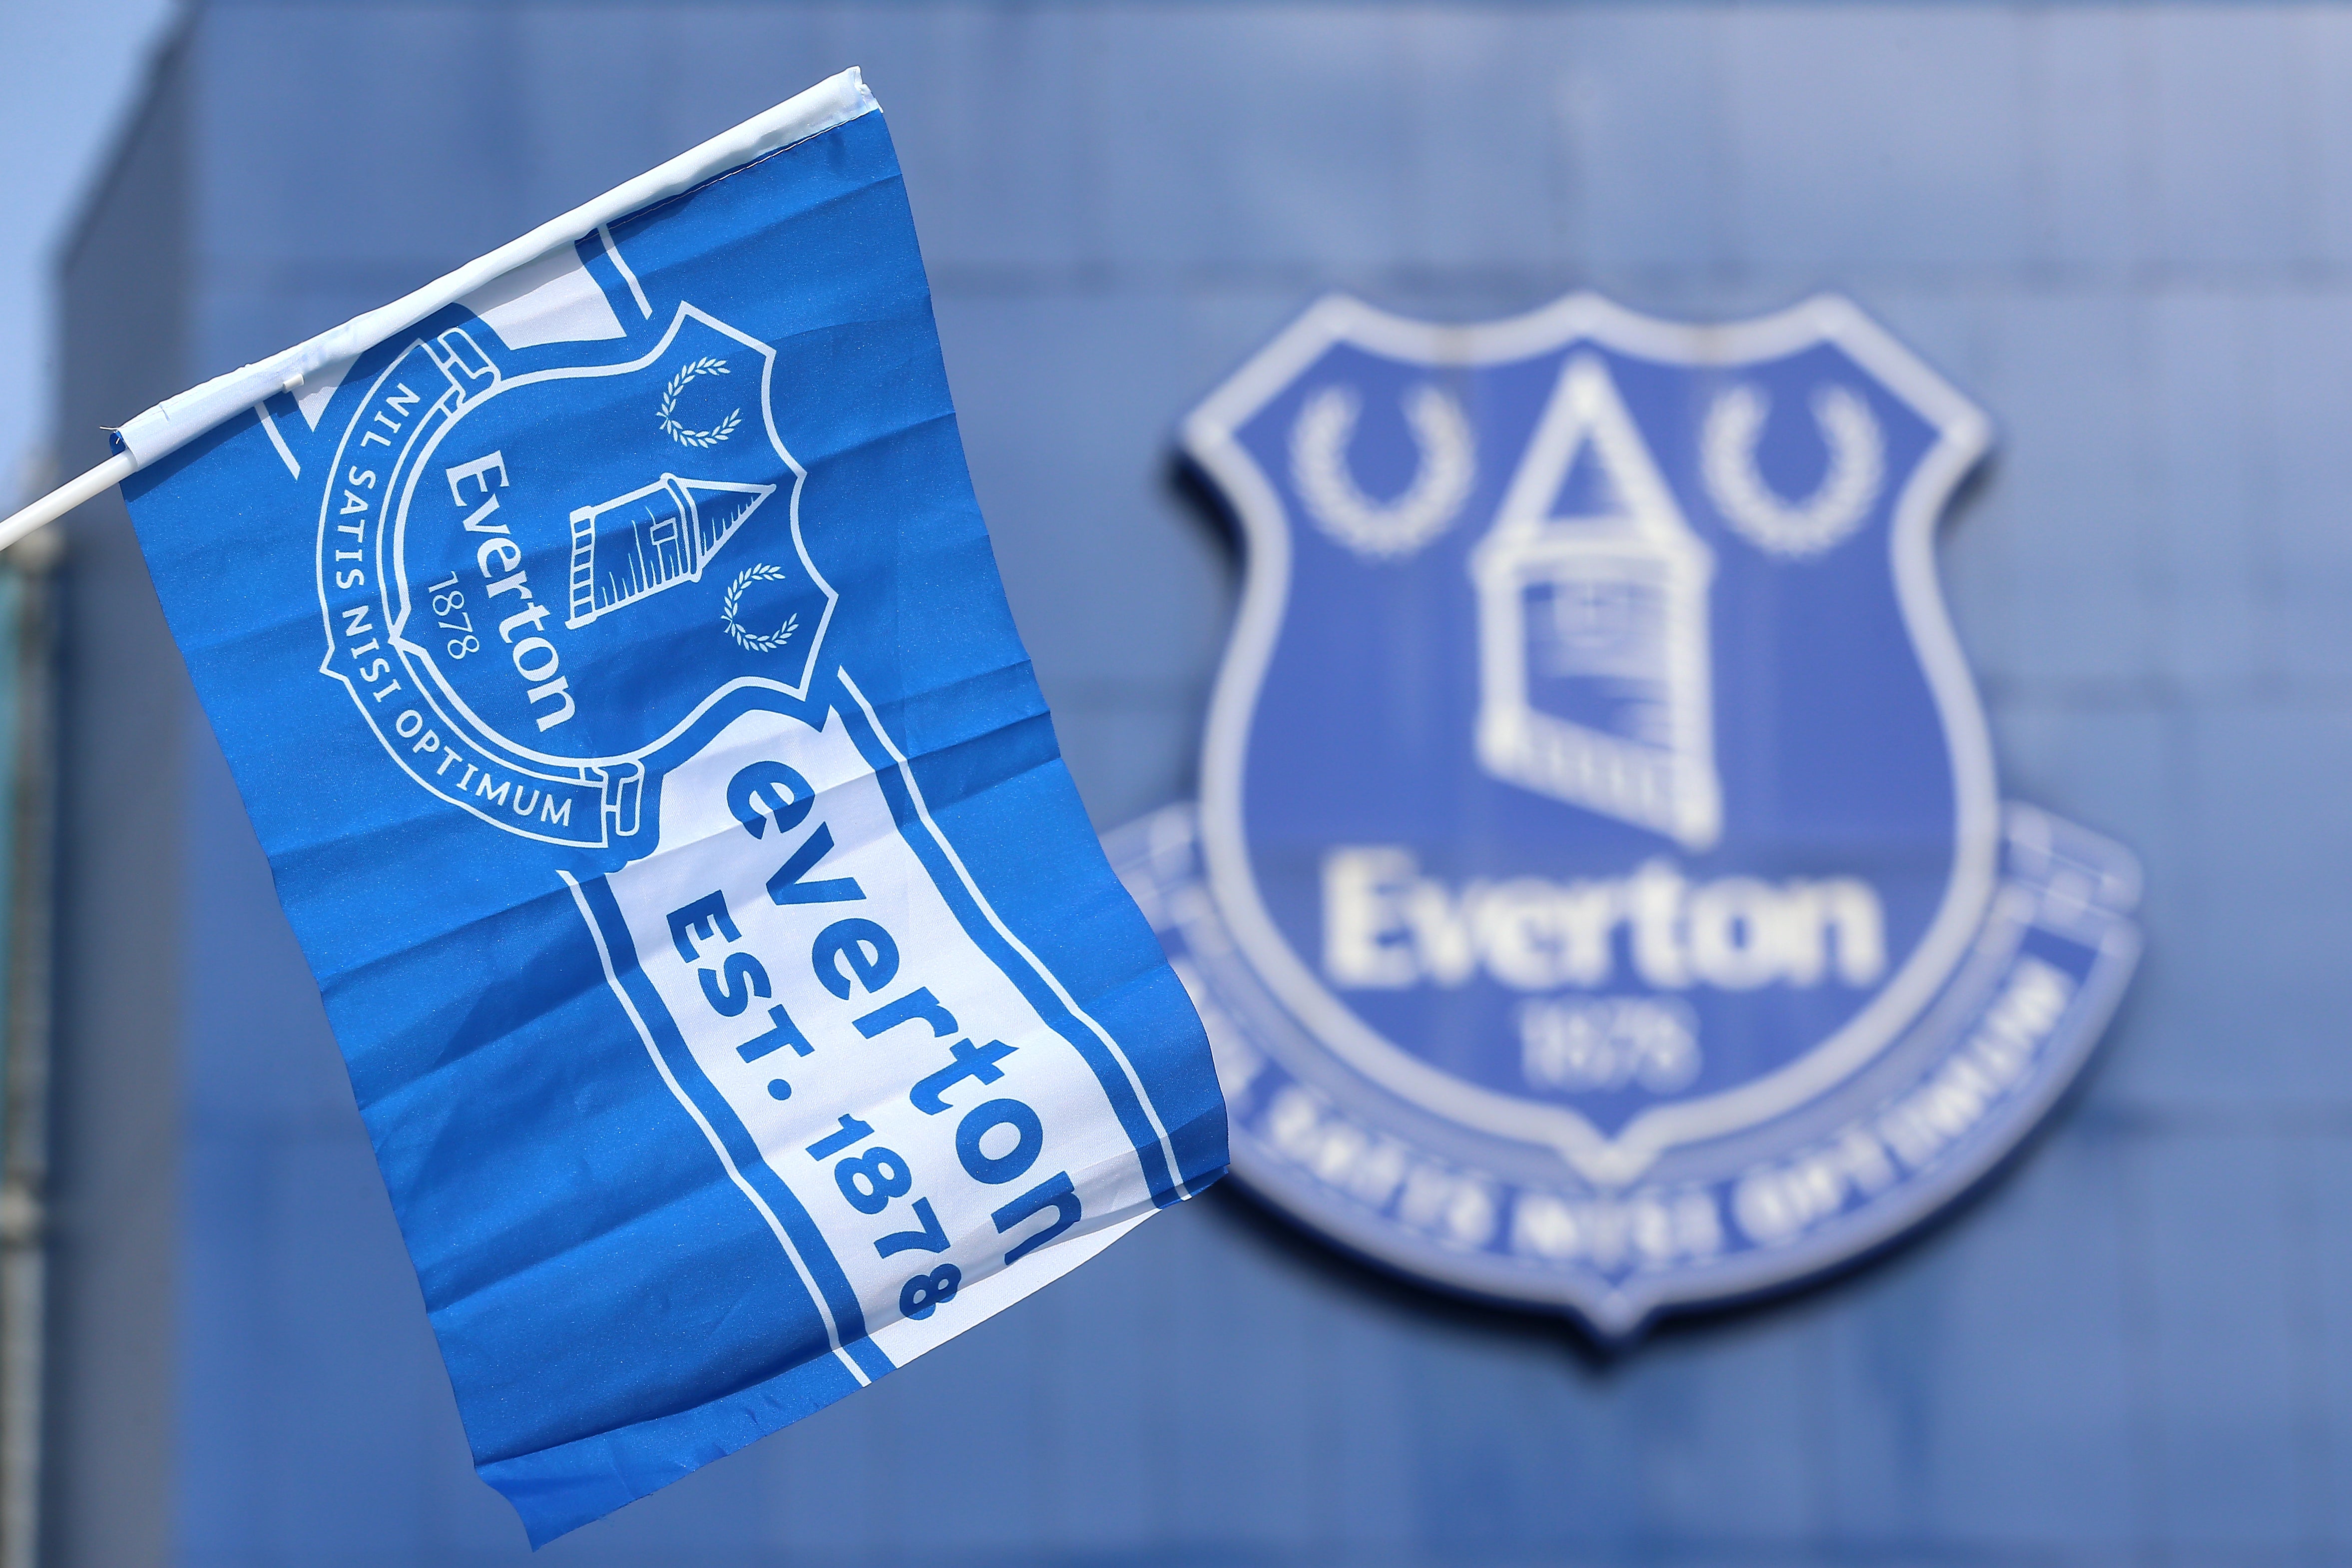 Everton have appealed a second Premier League charge for breaching profit and sustainability rules